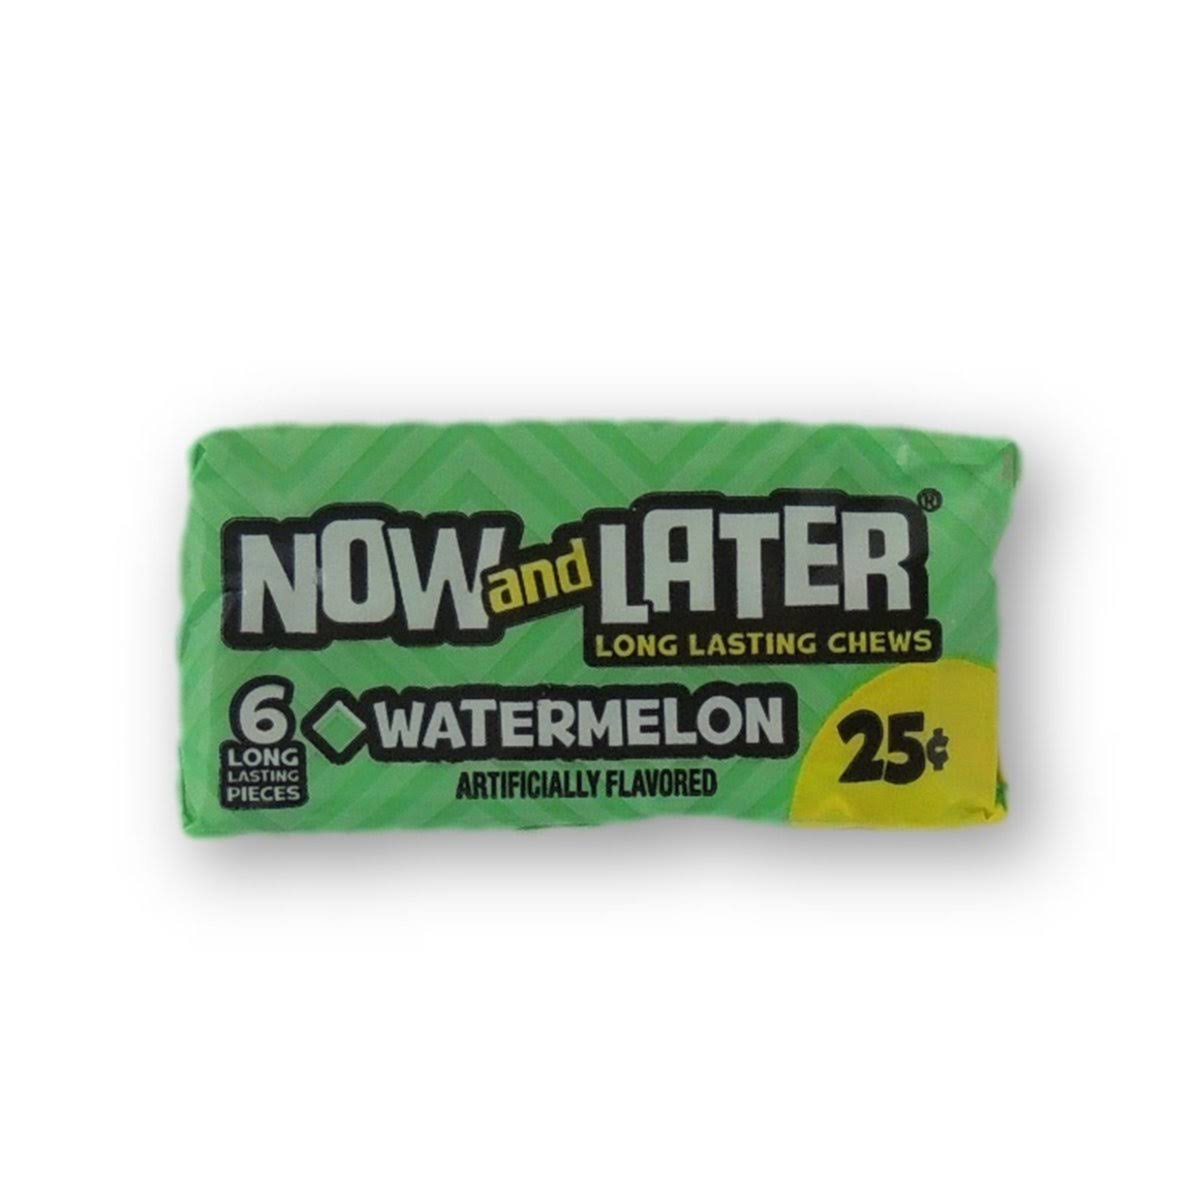 Now and Later Watermelon